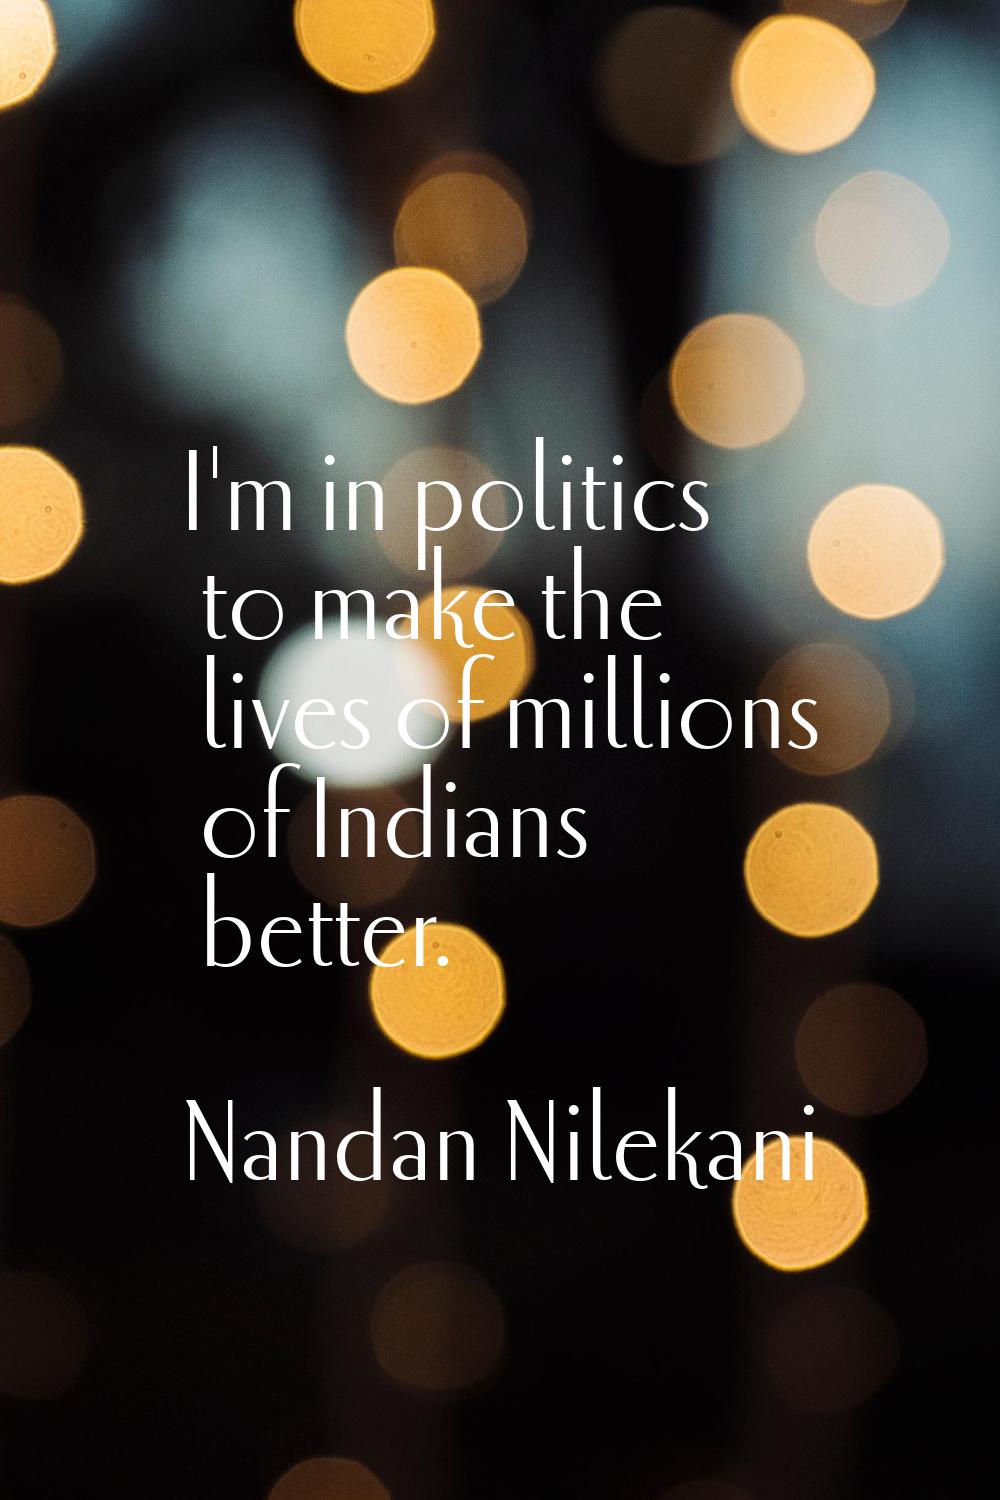 I'm in politics to make the lives of millions of Indians better.